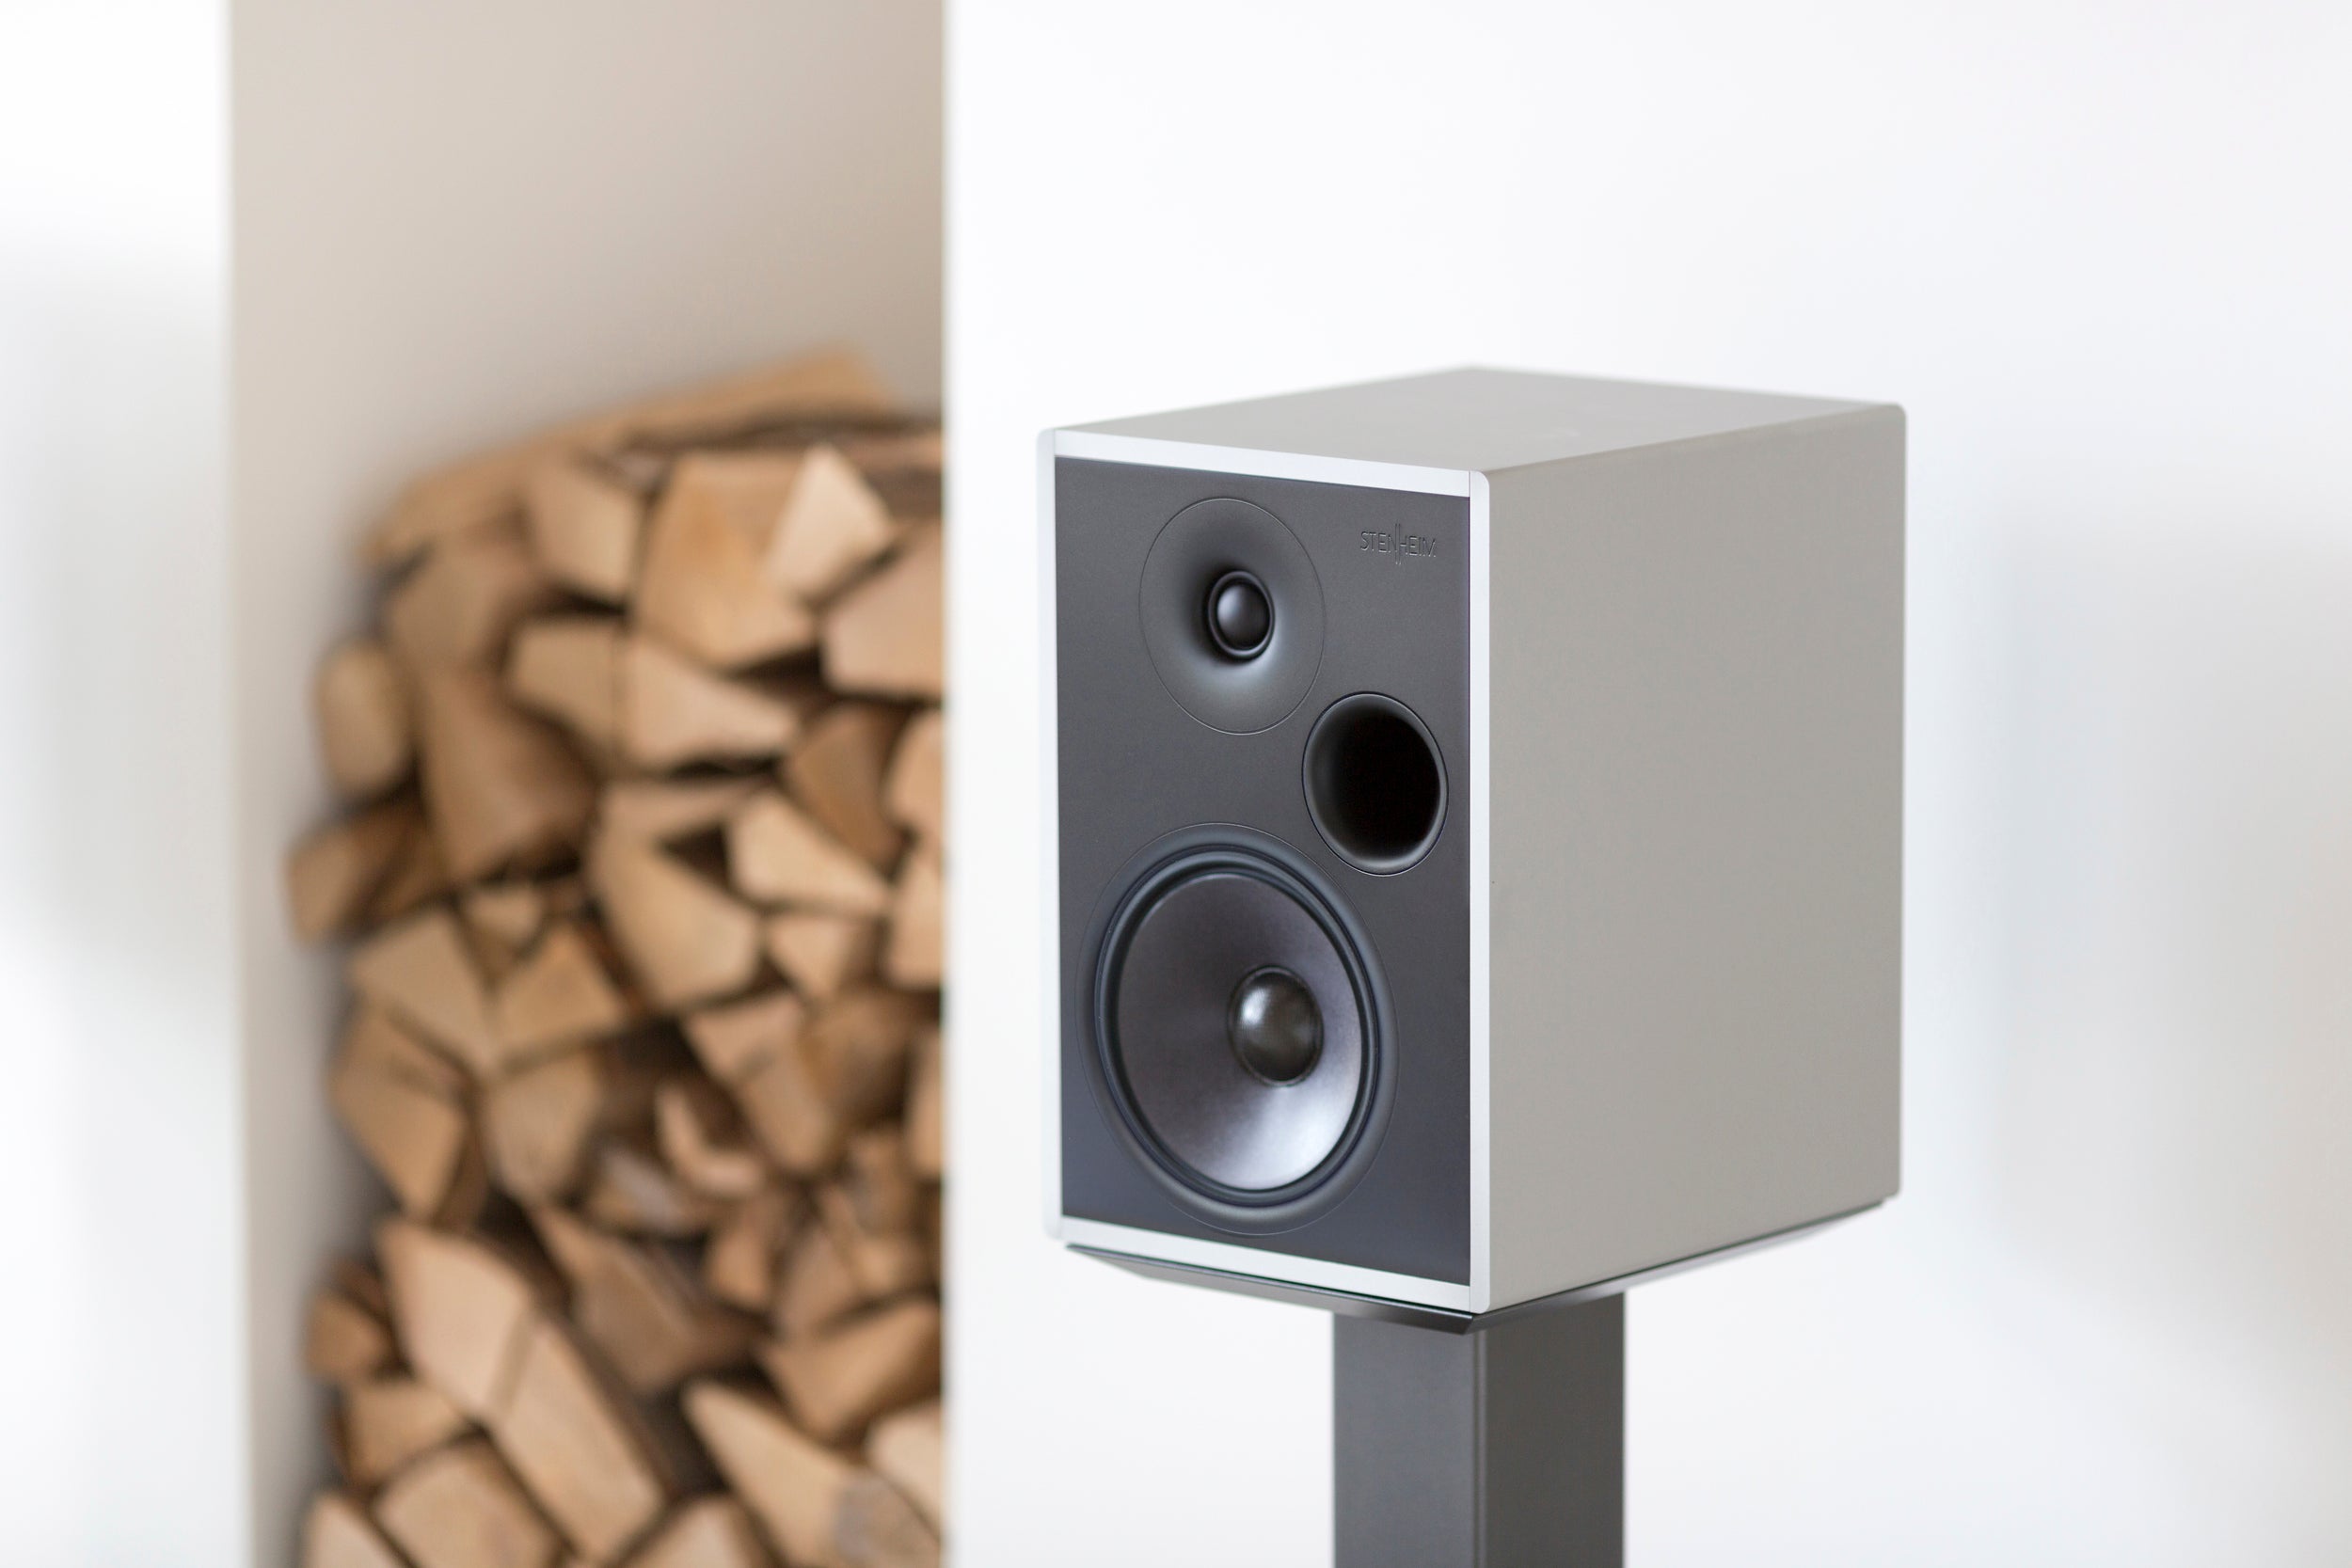 Stenheim Alumine Two Loudspeakers (available to demo)